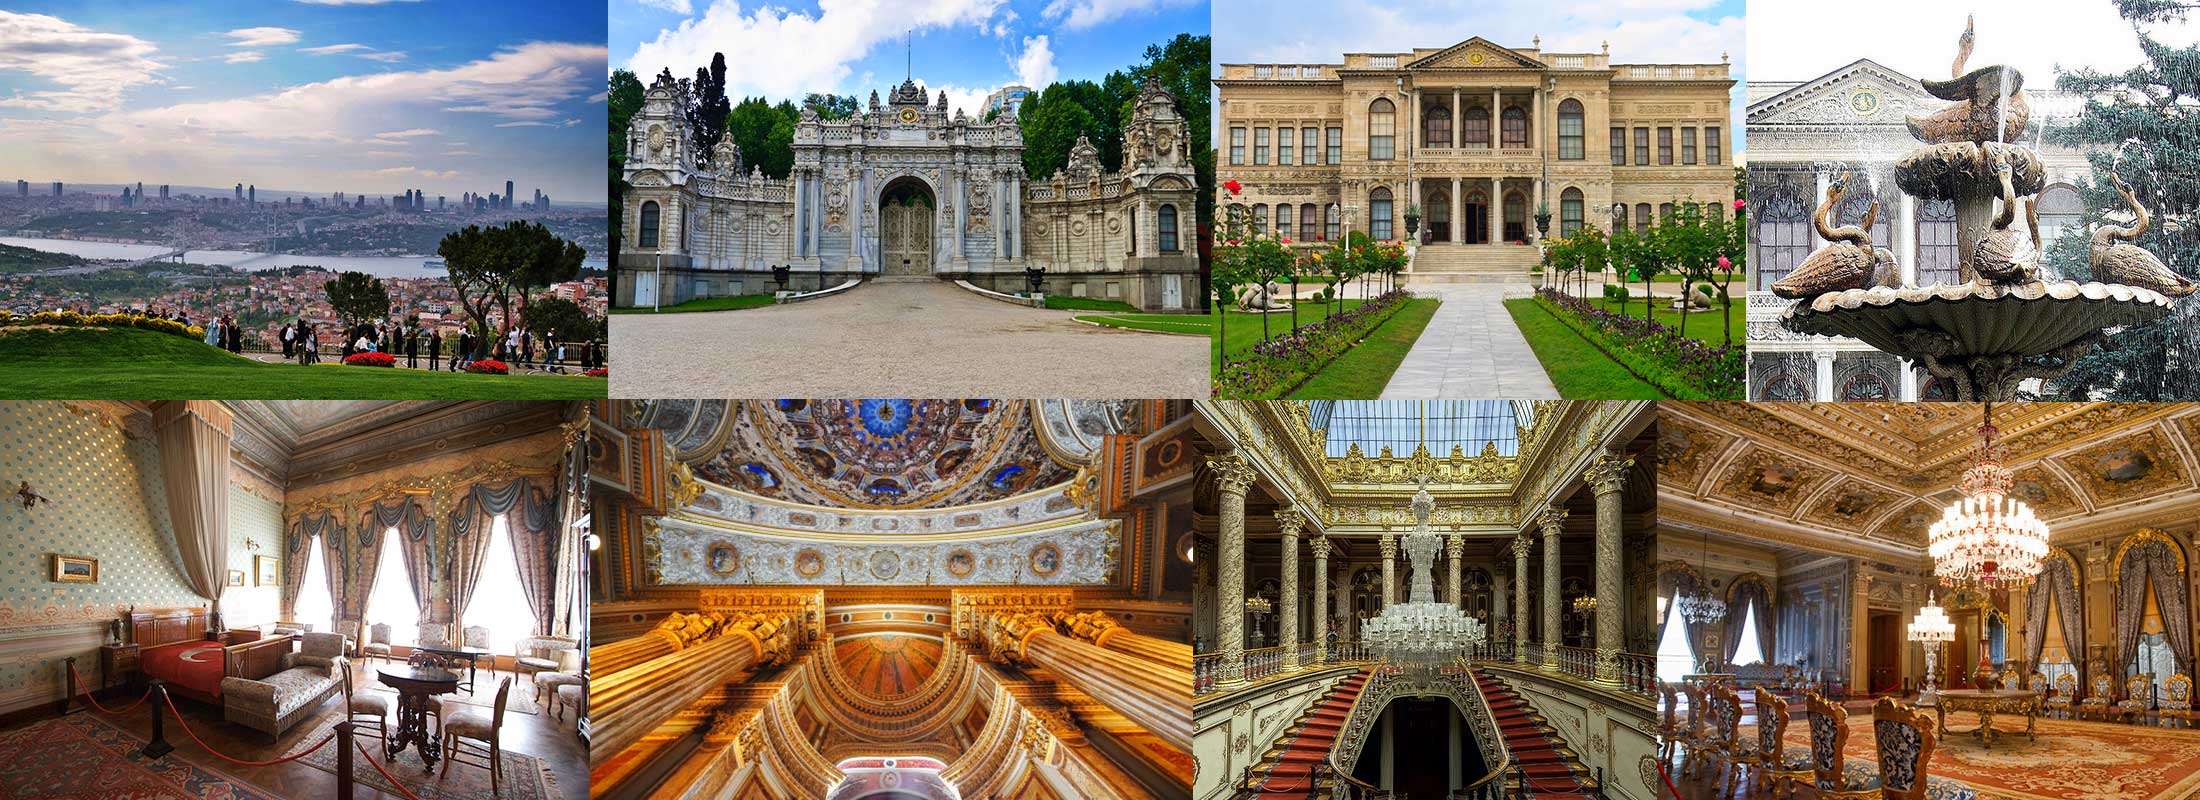 dolmabahce-palace-camlica-hill-istanbul-daily-city-tours